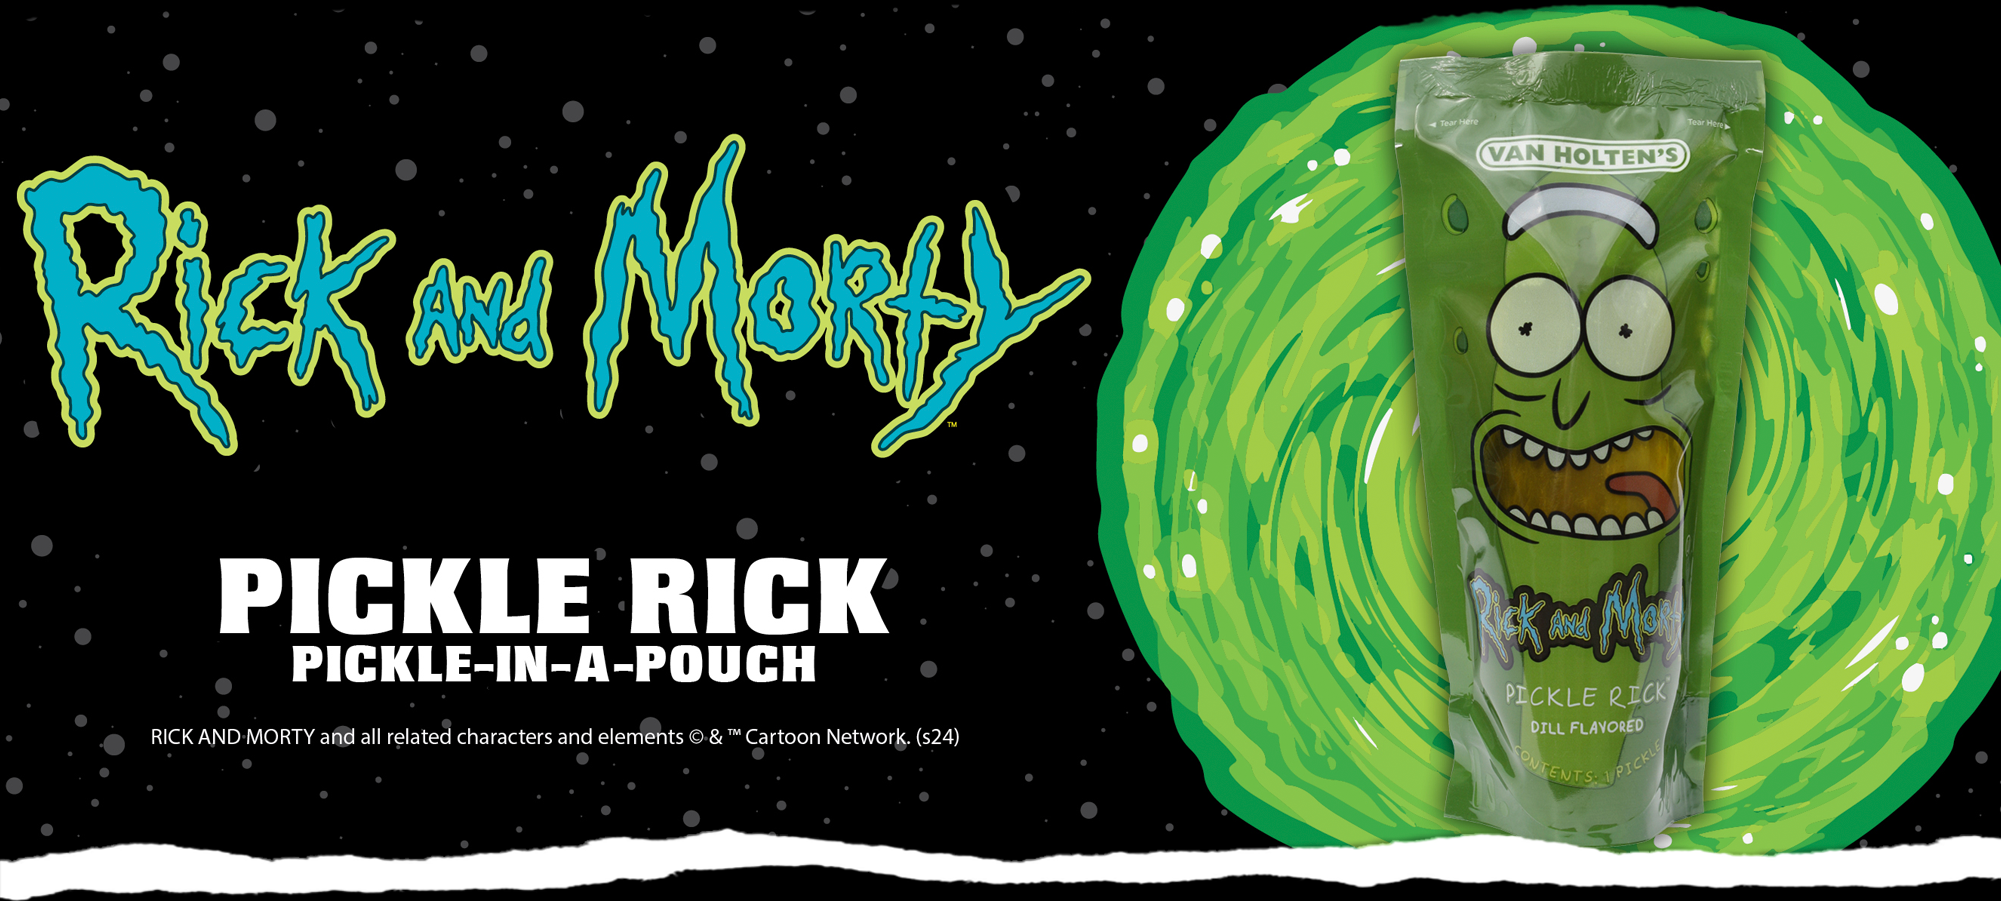 Pickle Rick Pickle-in-a-Pouch